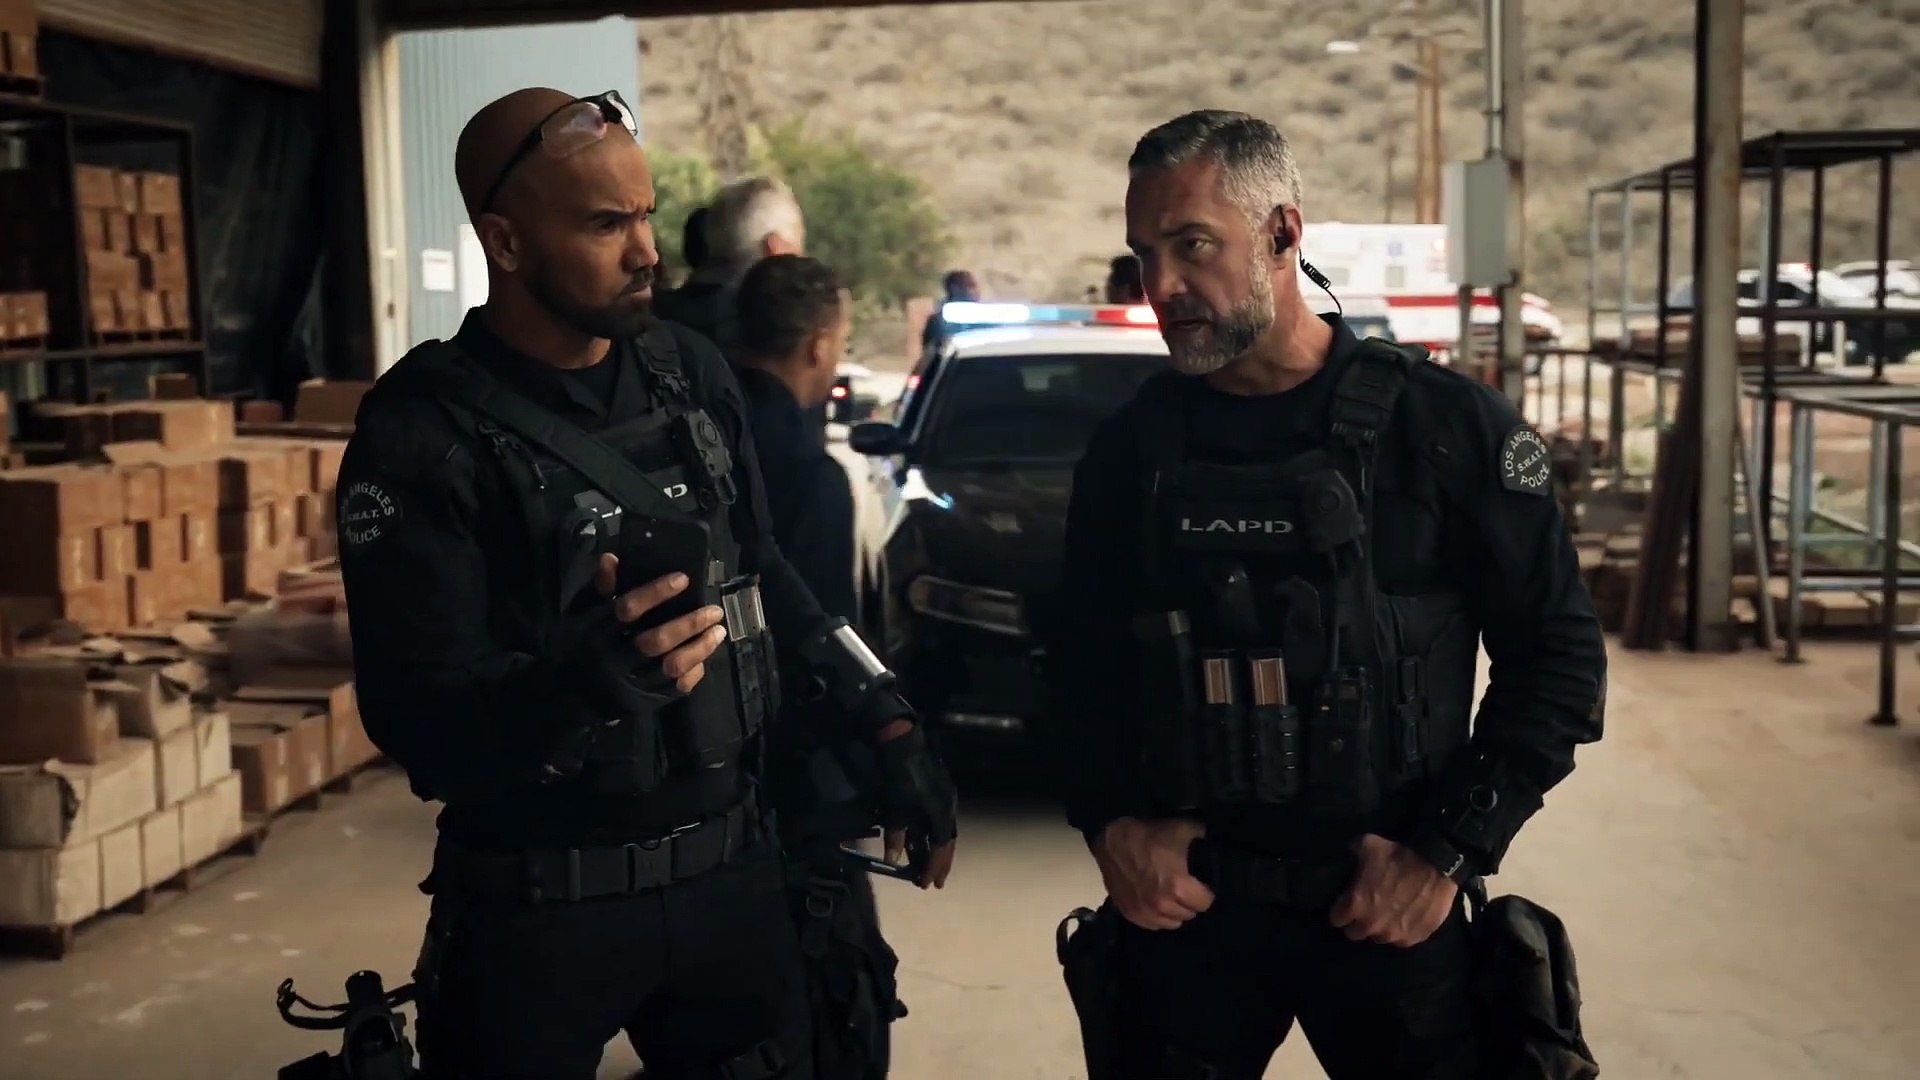 Swat Season 6 Episode 10 Release Date, Time & Where to Watch